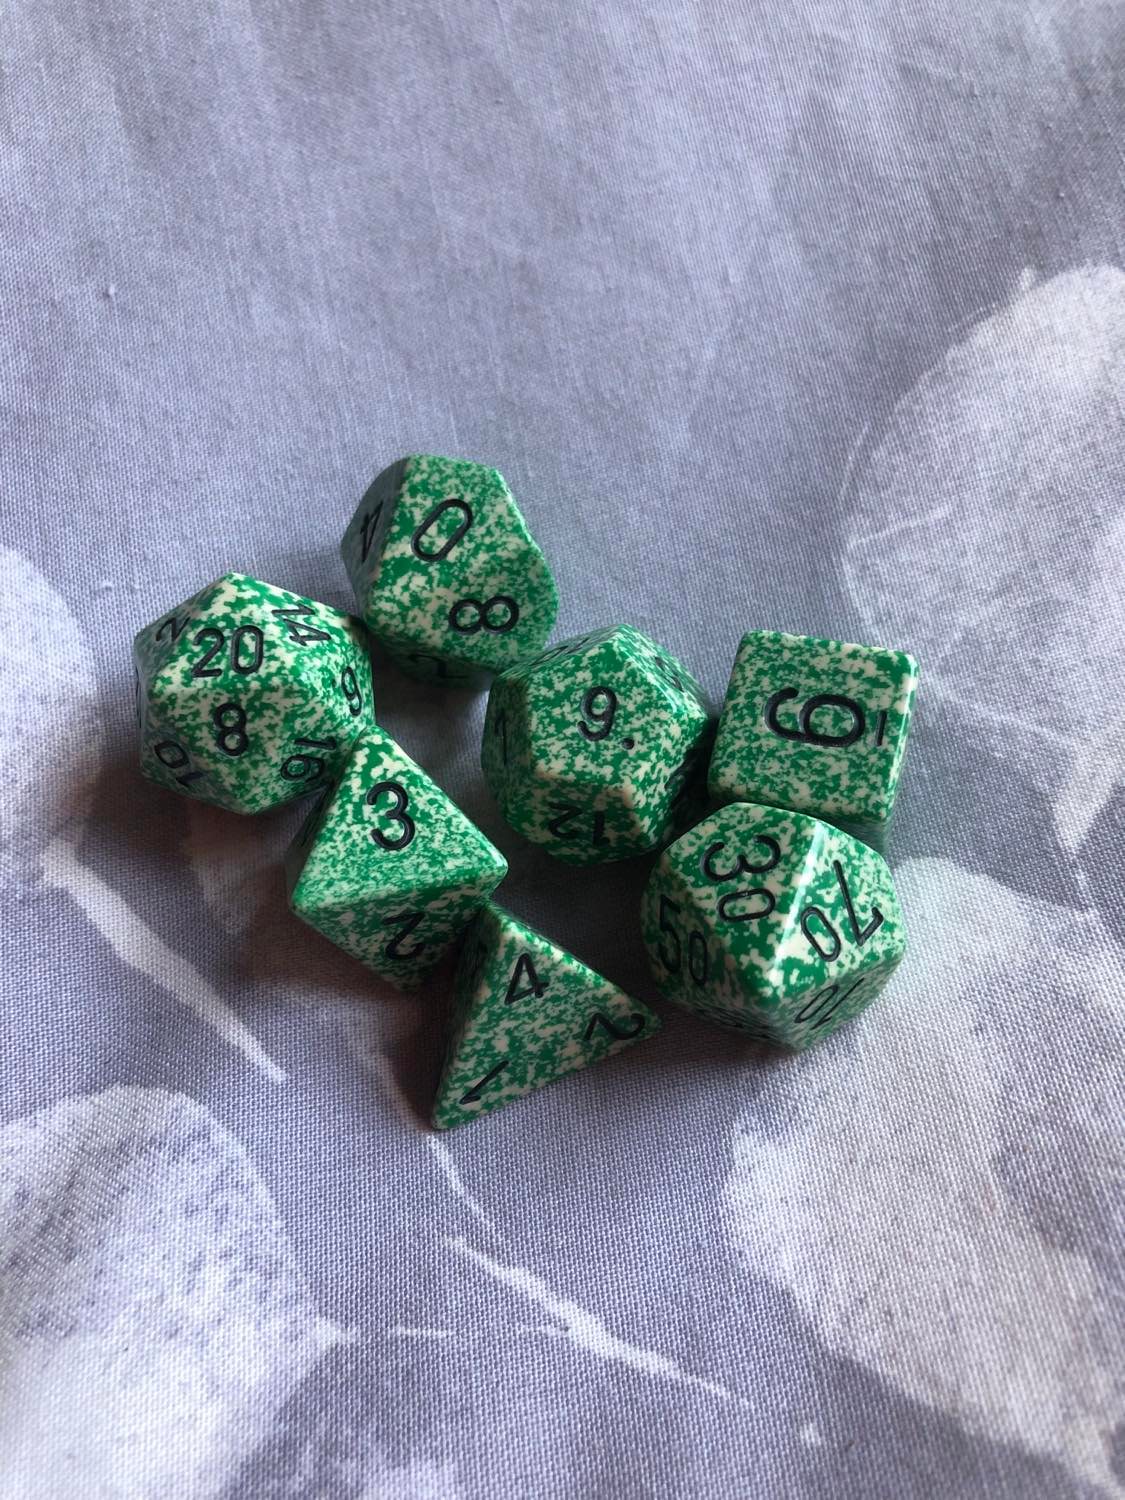 Chessex Speckled Loot, the very first dice set I ever owned, sitting on a grey and white leaf-patterned fabric.